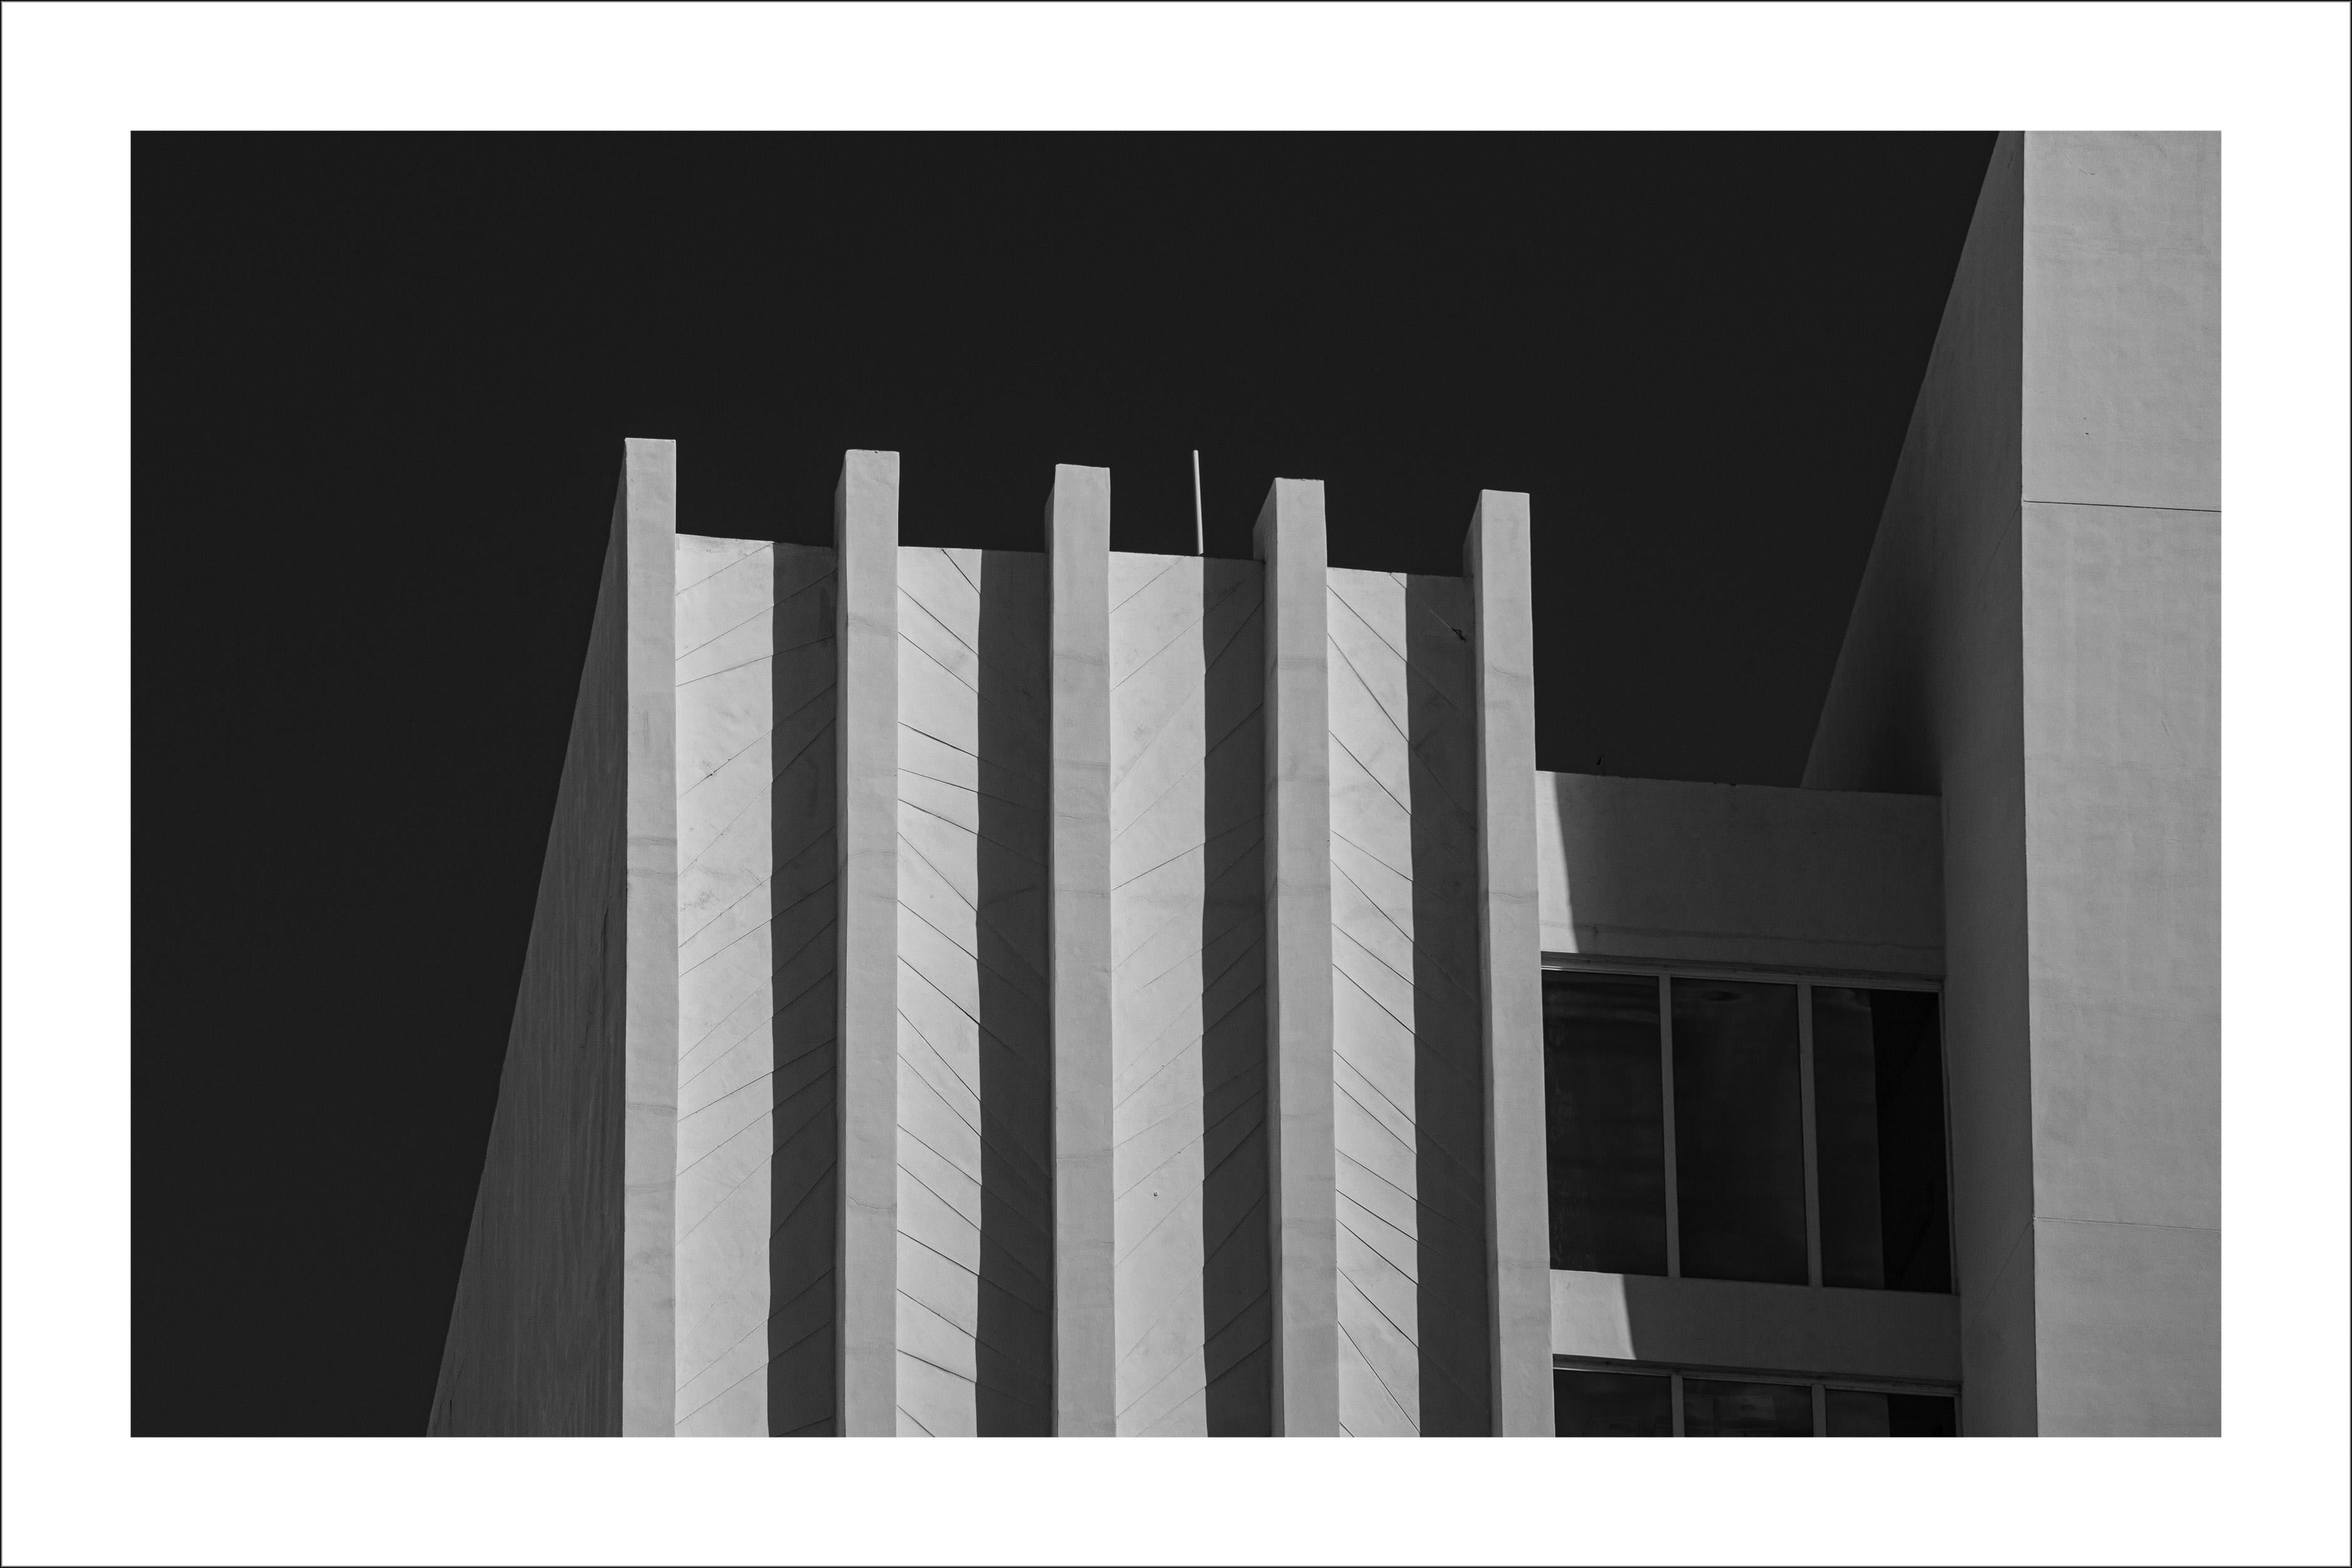 Kind of Cyan Black and White Photograph - Art Deco Beach Facade, Miami Vintage Hotel Building, Black a& White Architecture